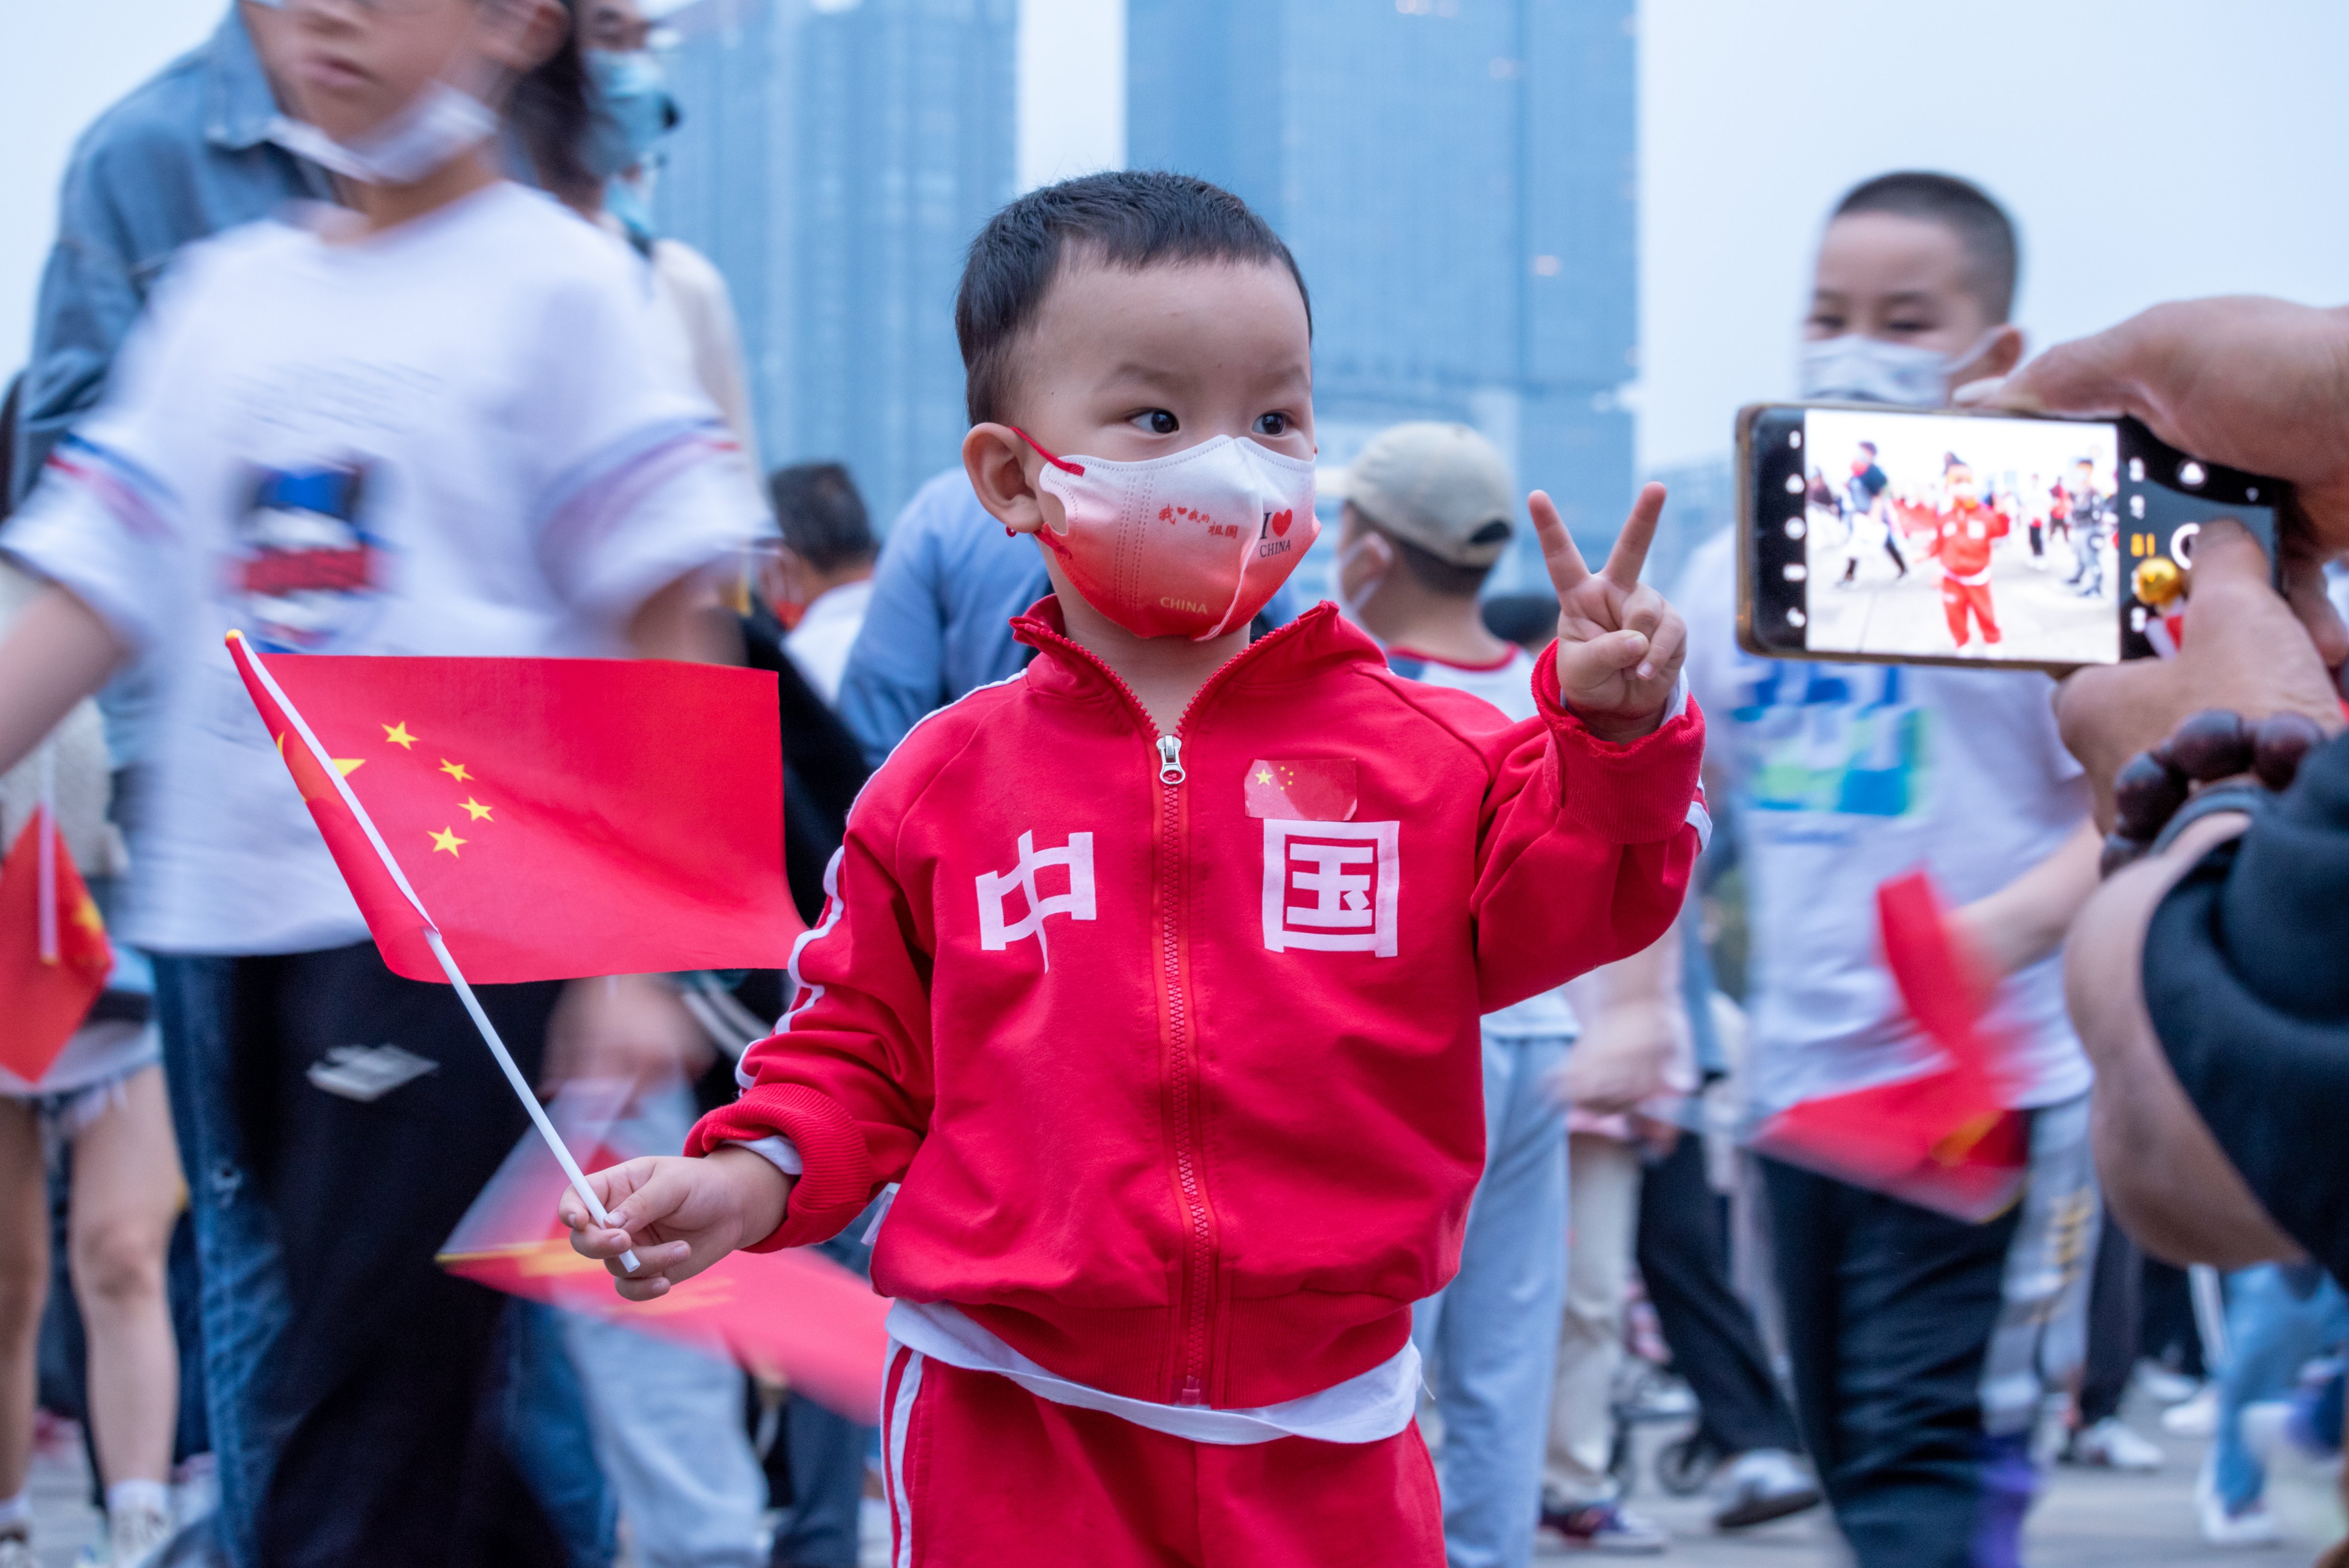 A child poses for a photo at Tianfu Square during a flag-raising ceremony in celebration of the 73rd anniversary of the founding of the People's Republic of China, in Chengdu, Sichuan, Oct. 1, 2022. (Wu Ke—VCG/Getty Images)